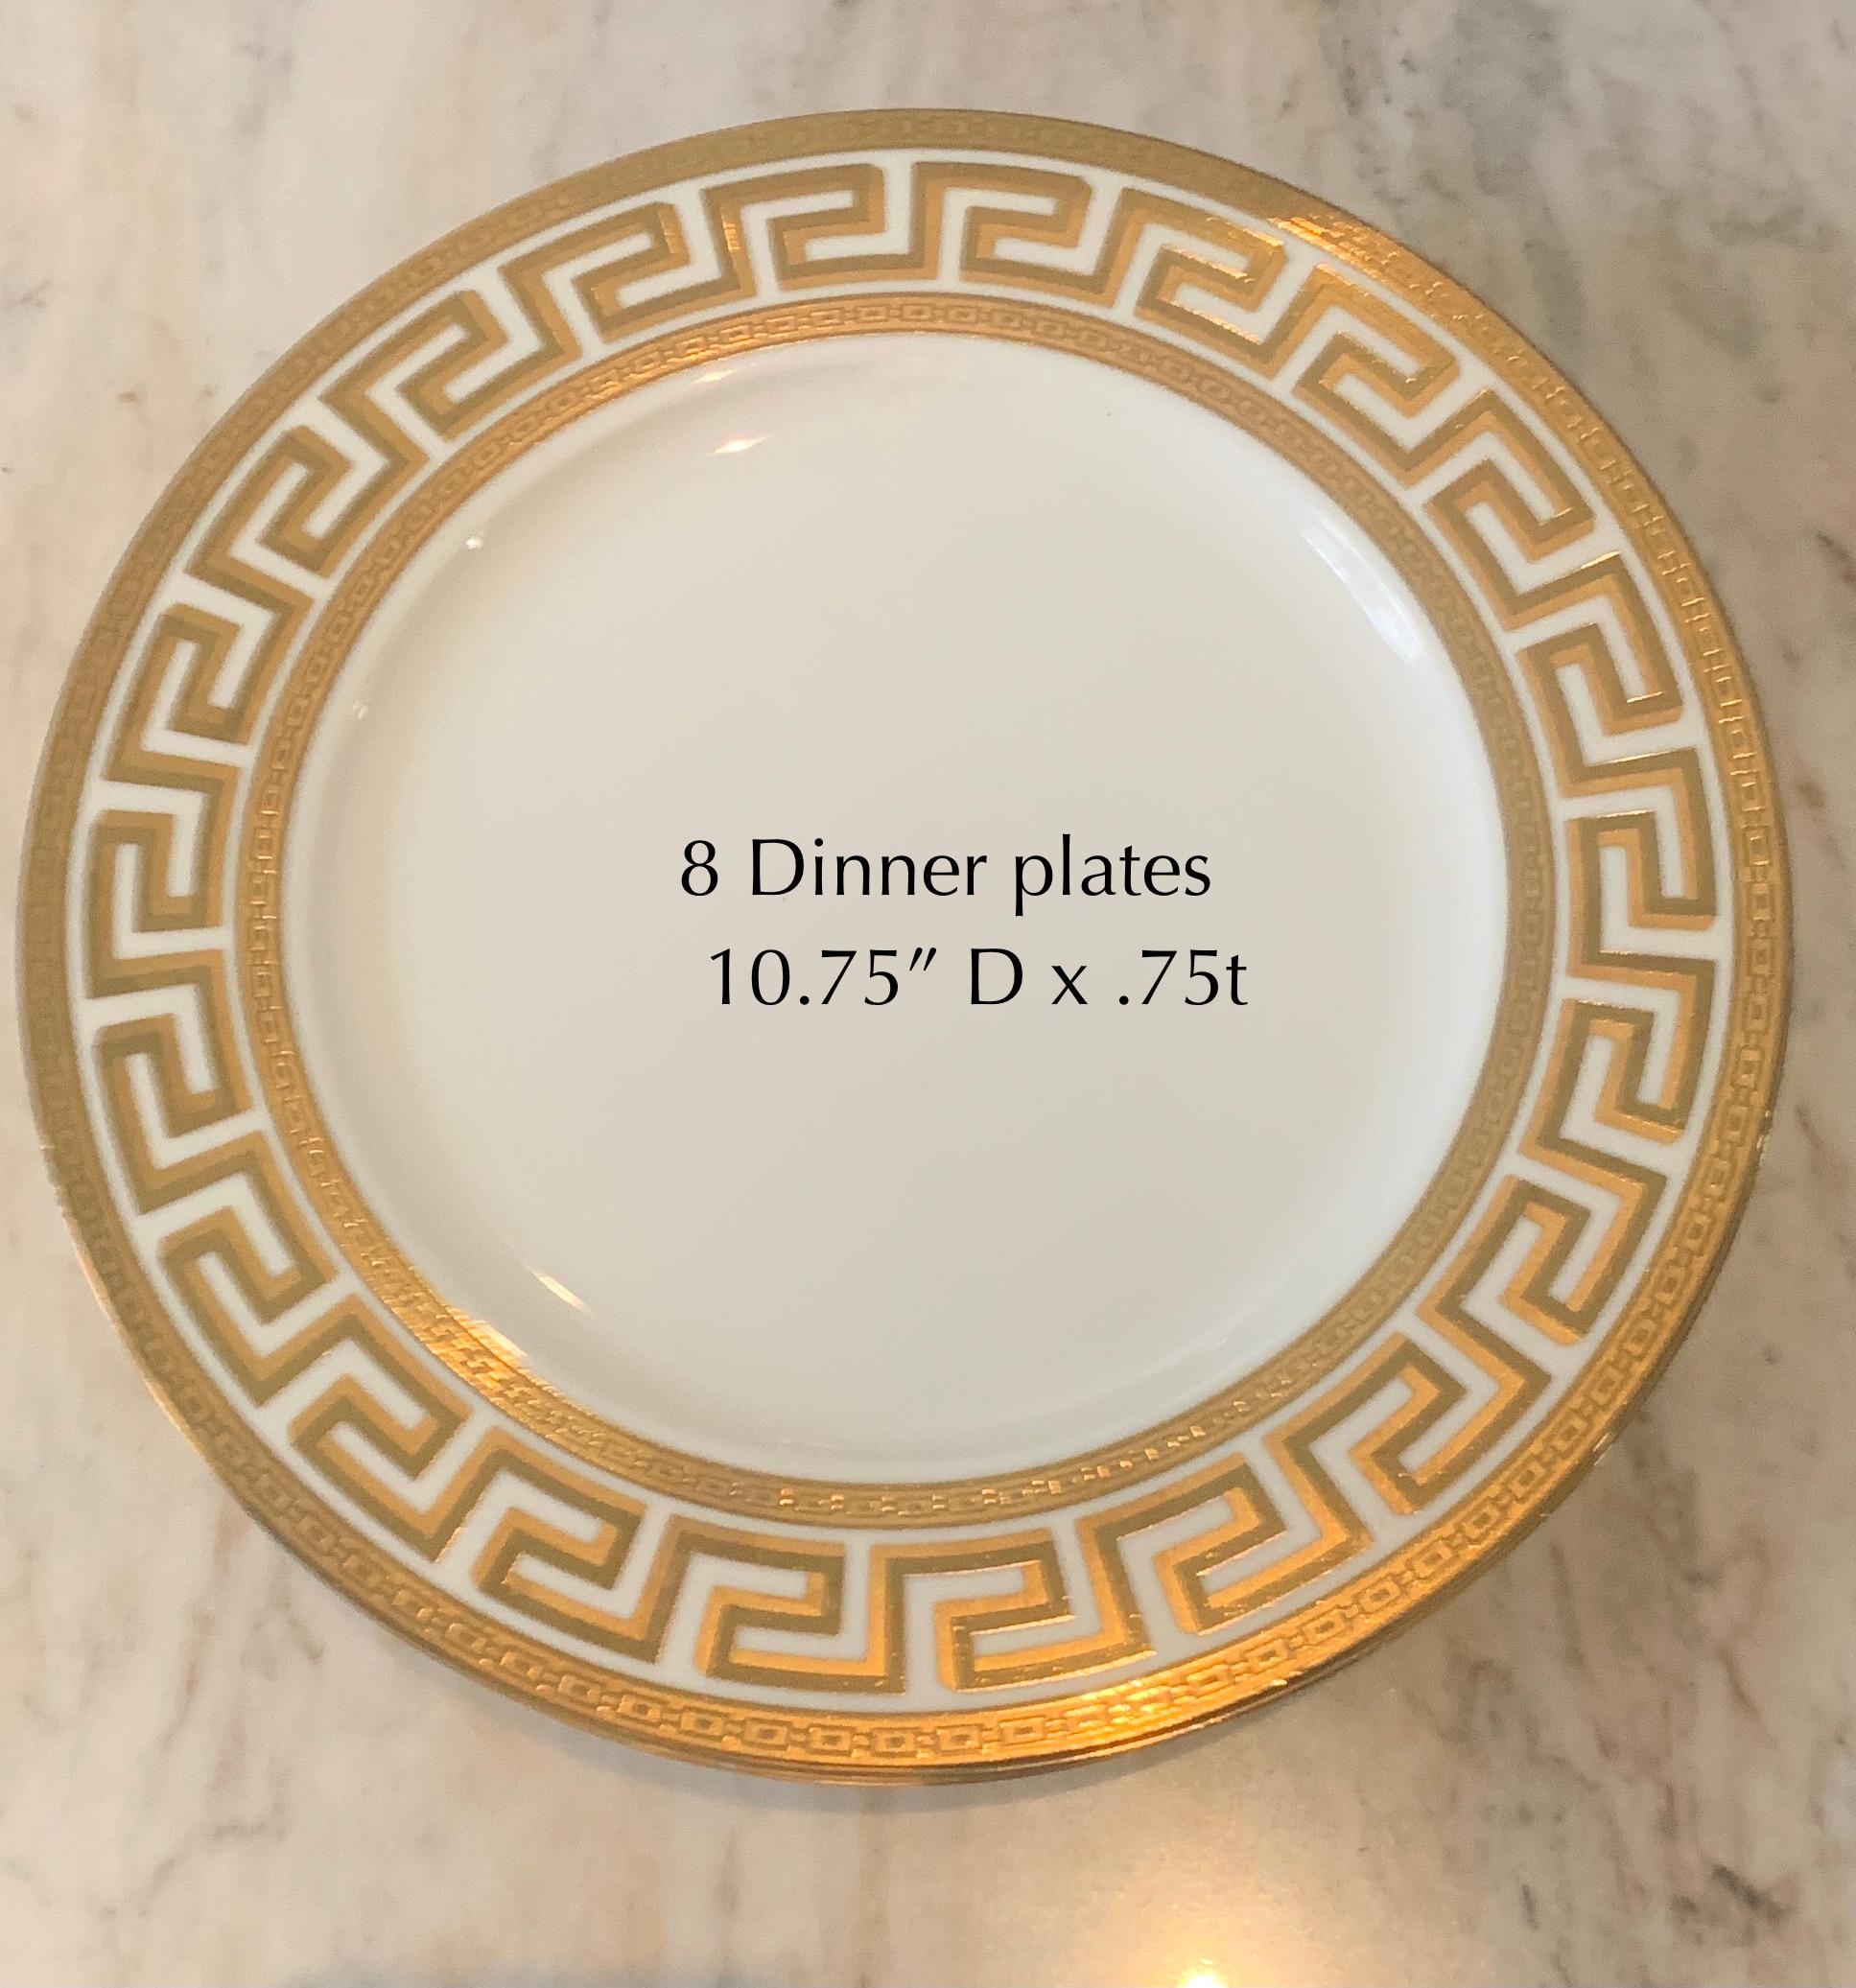 An impressive set of German Porcelain dinner ware - The Hollywood Regency Sophisticated Greek Key pattern in Gold will give any table the look of Versace. The set has a tea service of 6, or a dinner and soup service for 8. Also included are a tea